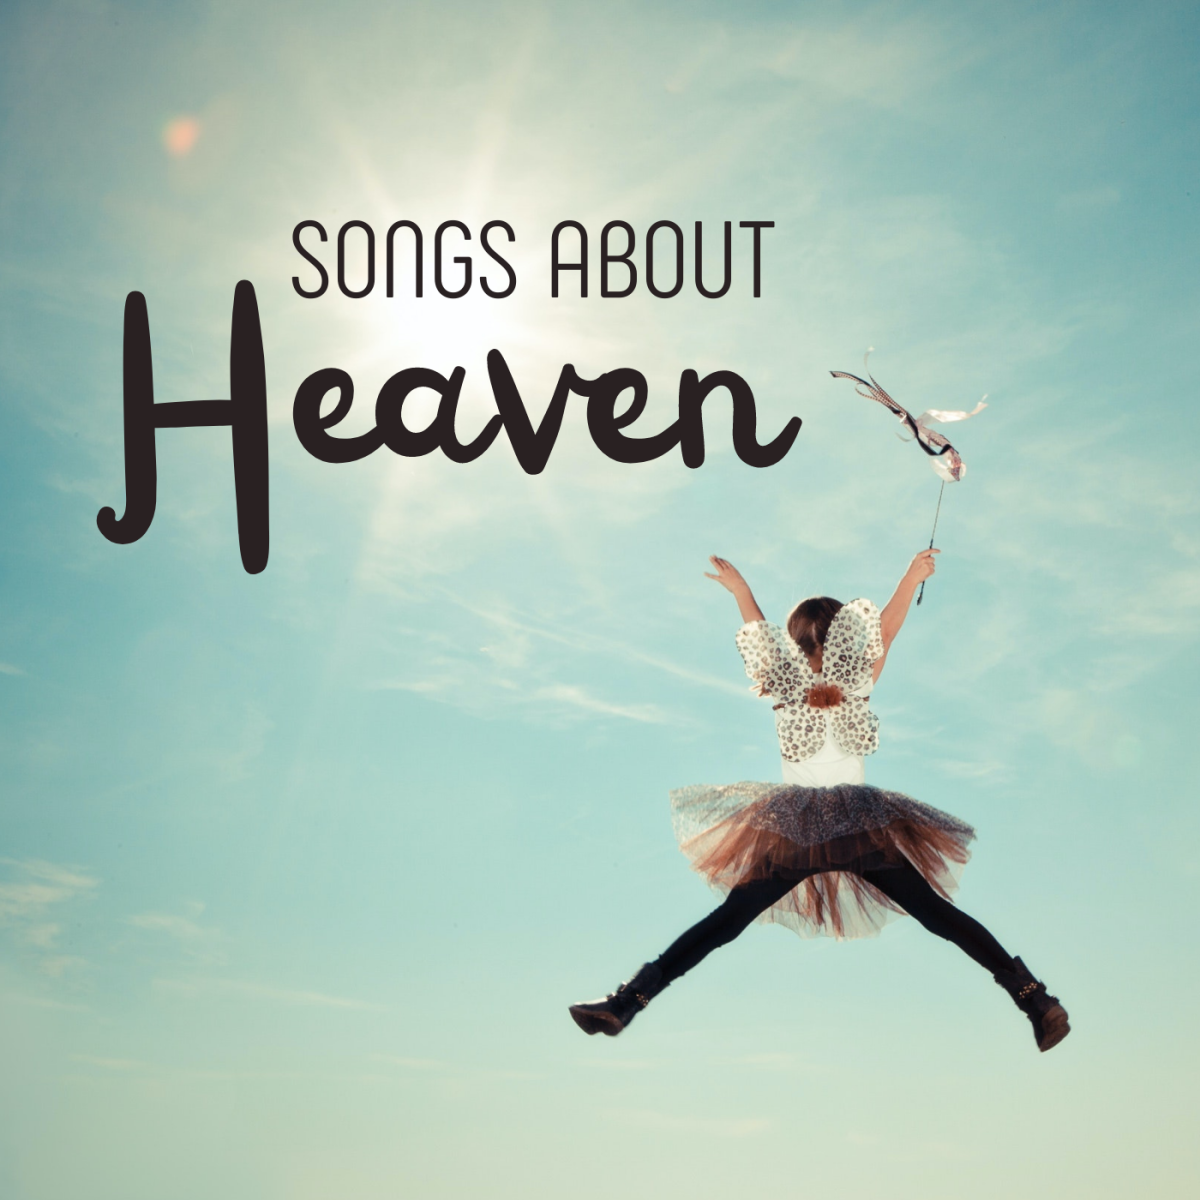 100 Best Songs With “Heaven” in the Title